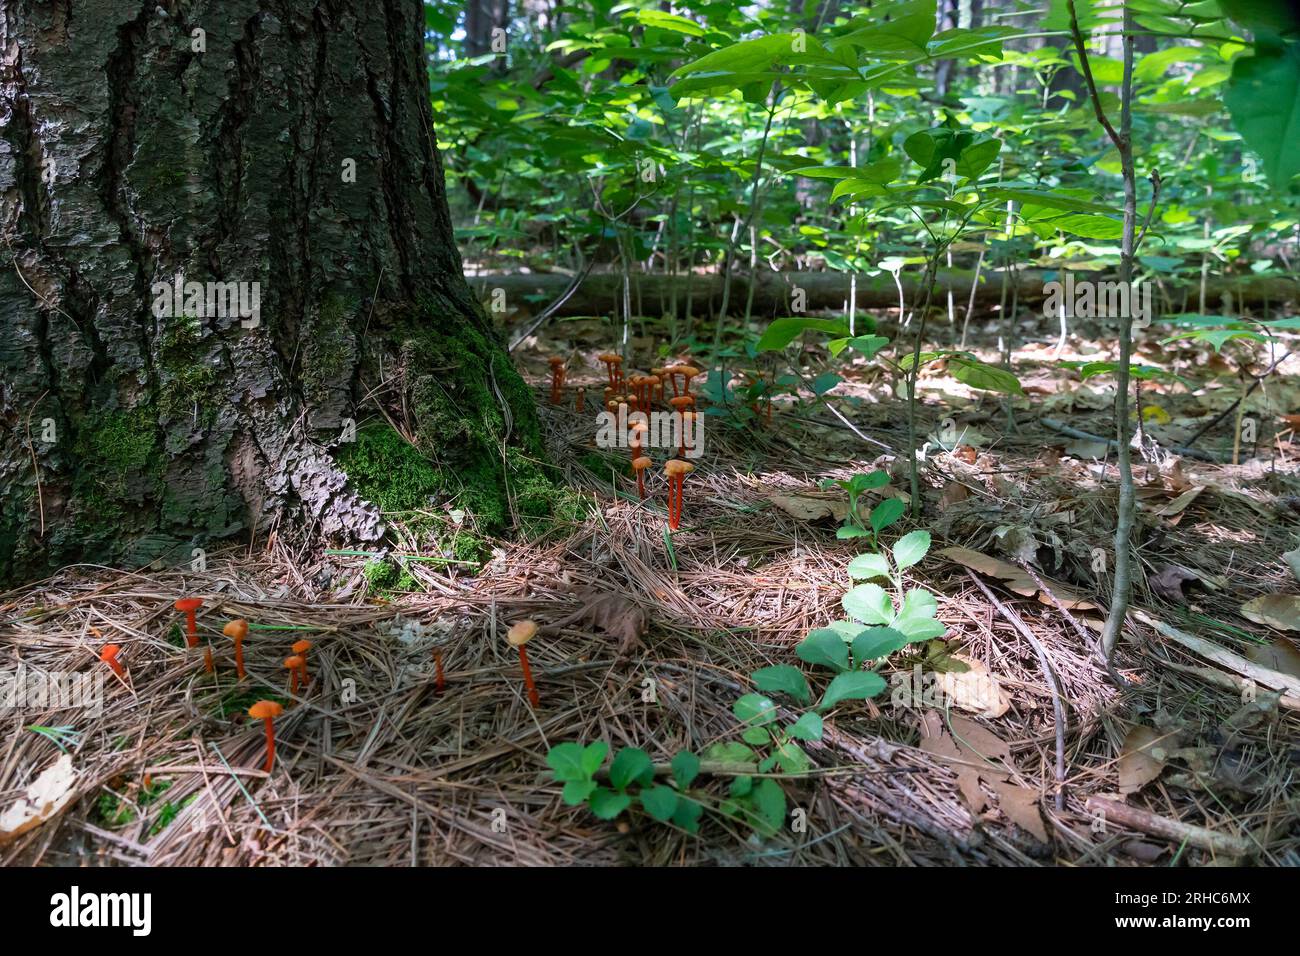 Mushrooms on thin red legs grow among pine needles near the roots of a large tree Stock Photo